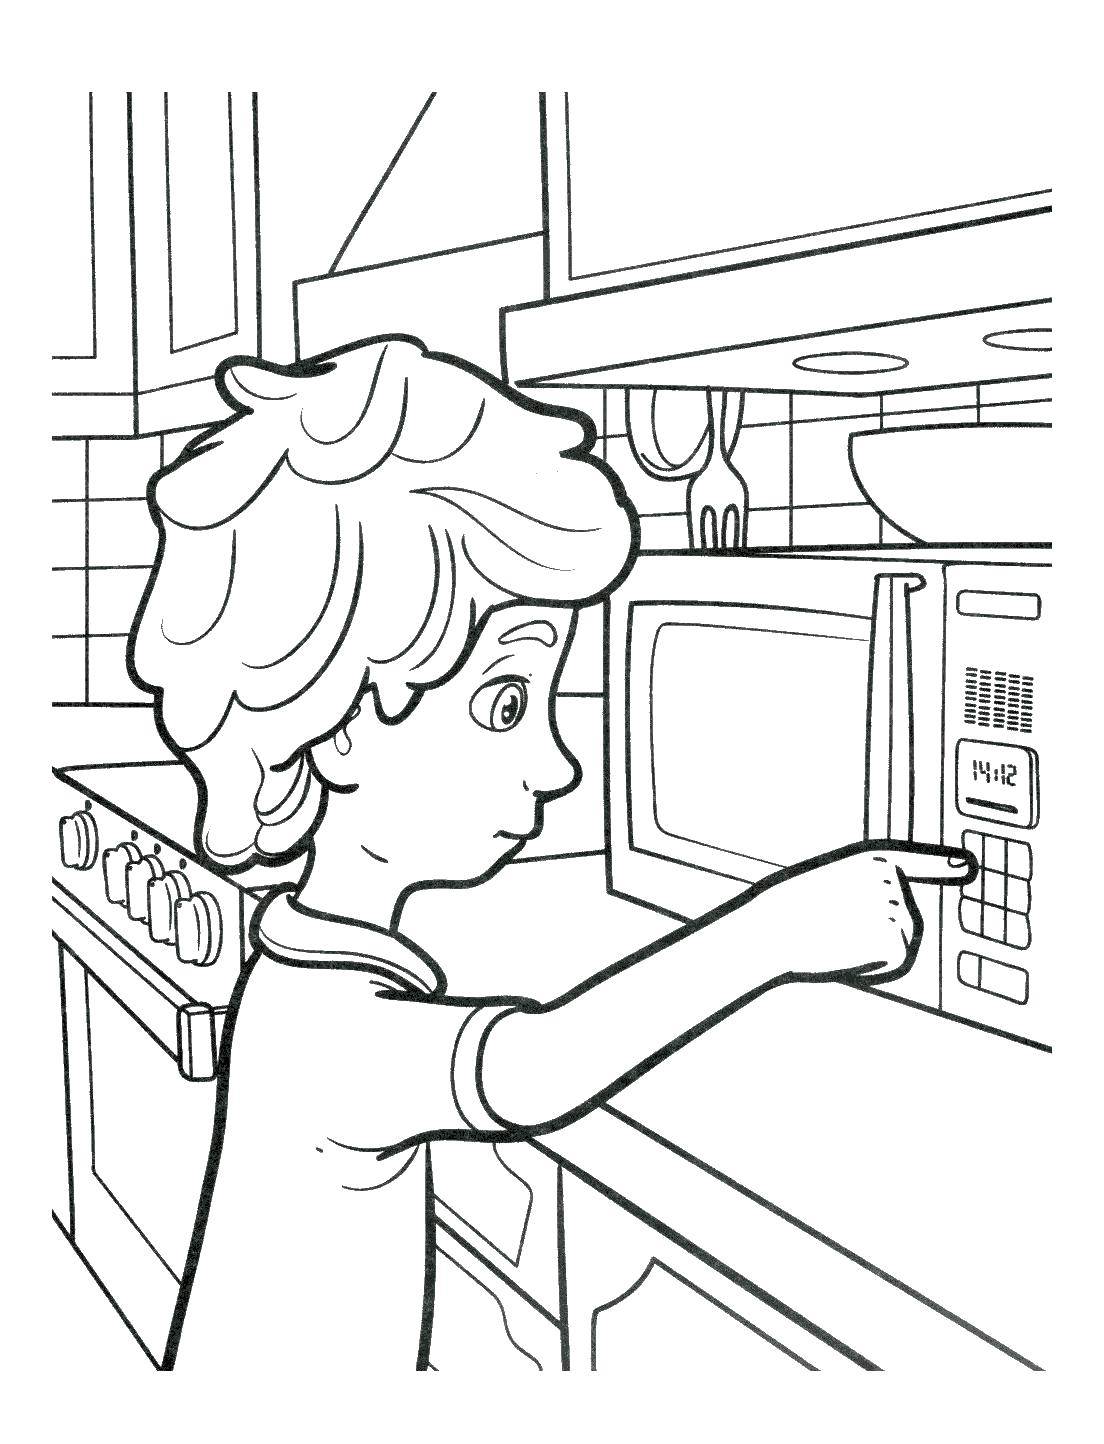 Online coloring pages Coloring page Dimdimich includes microwave fixies,  Download print coloring page.